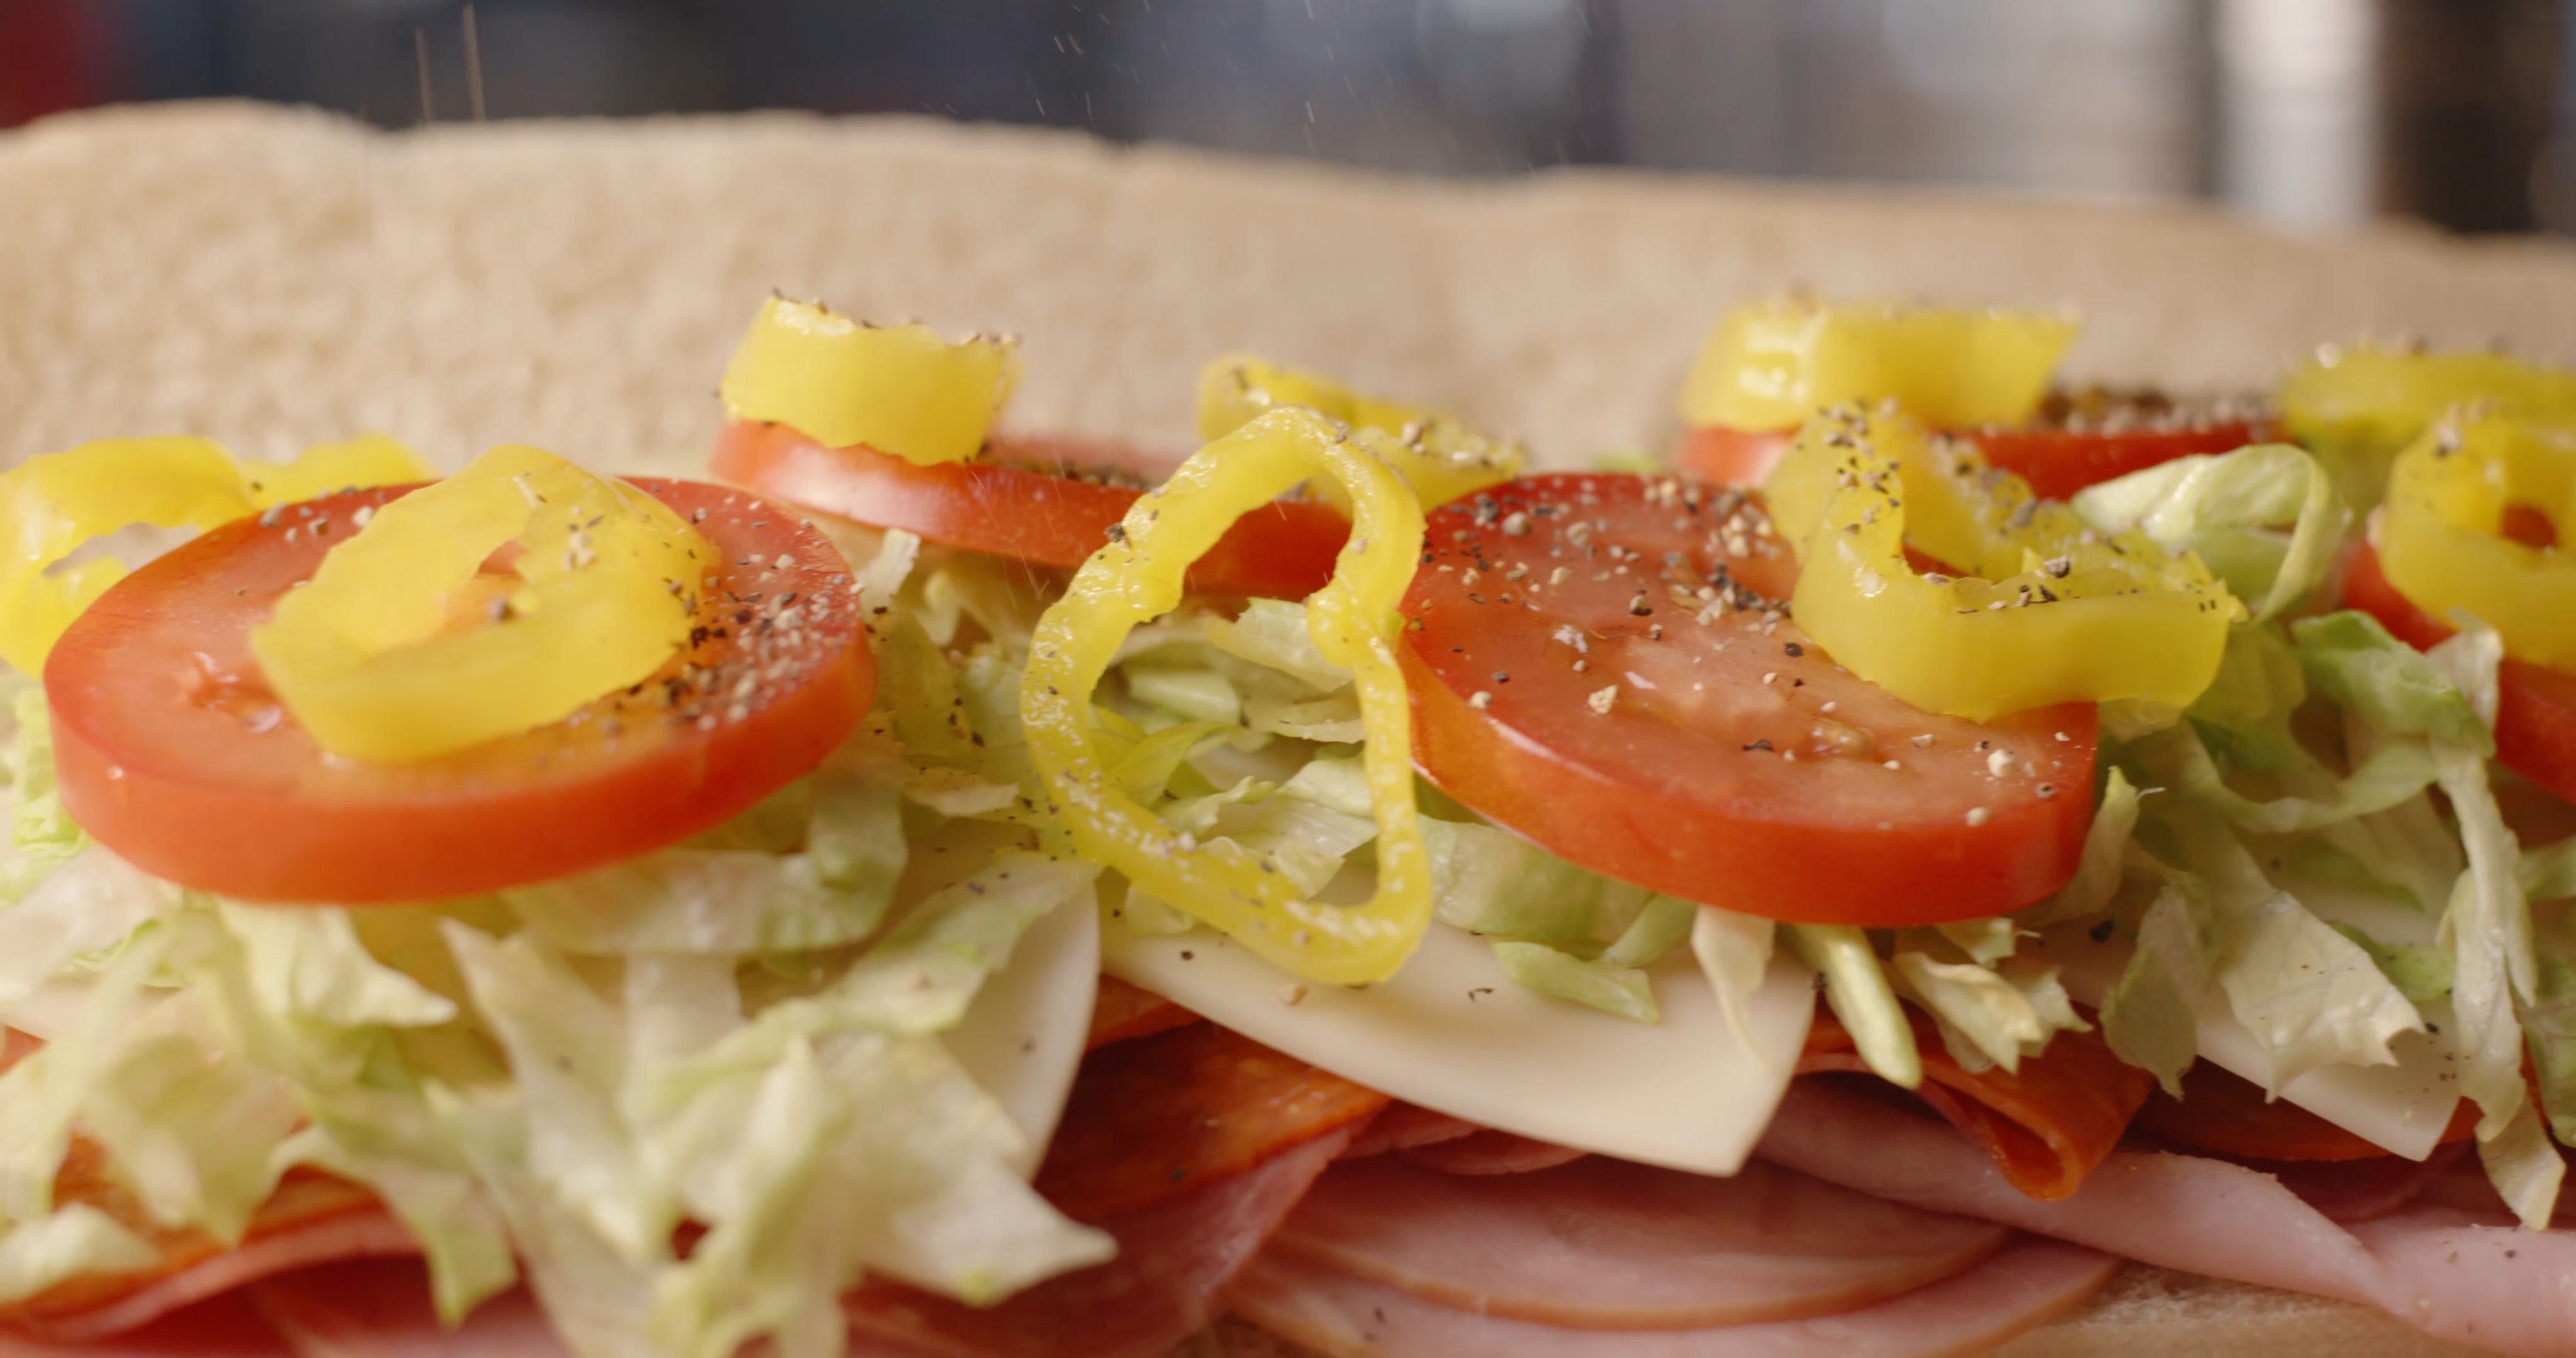 A close up of fresh tomatoes, banana peppers, lettuce, meats, and cheeses on a Casey's sub sandwich